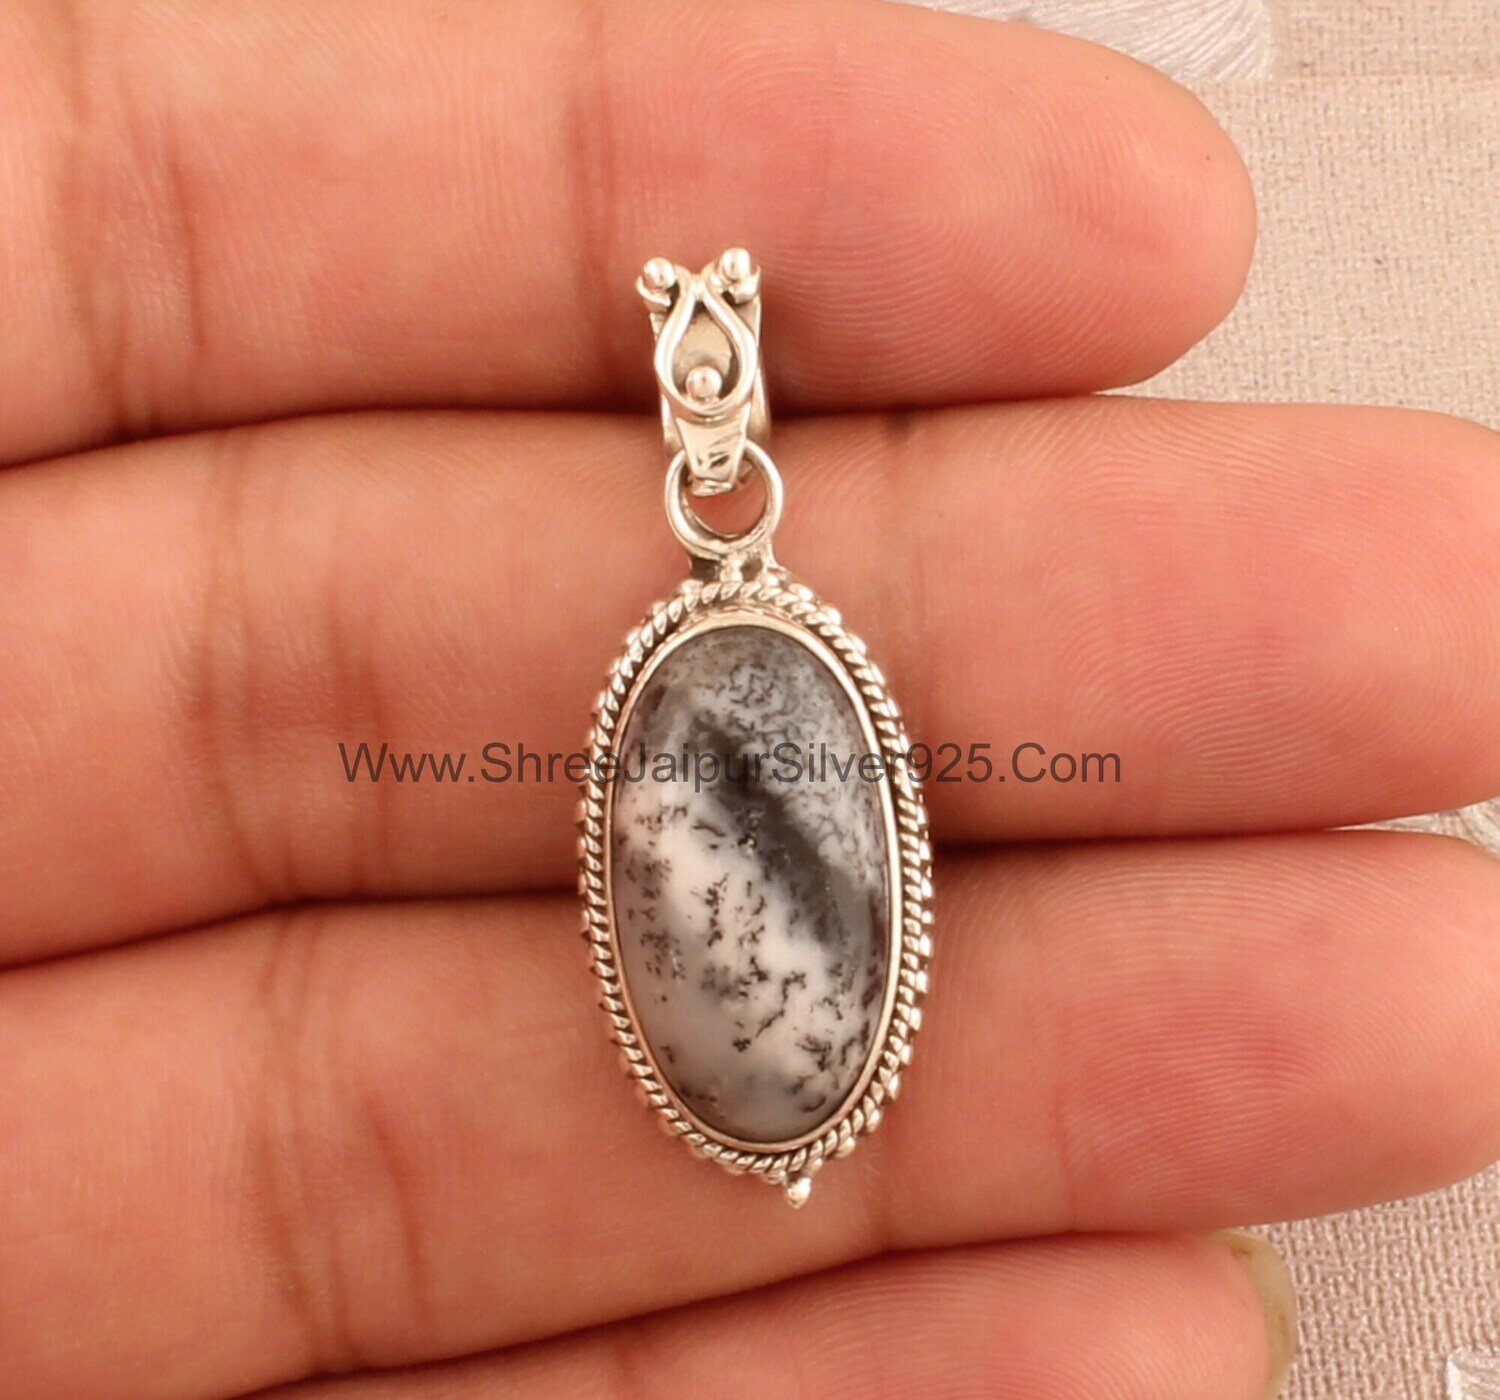 Natural Dendritic Opal Solid 925 Sterling Silver Necklace Pendant For Women, Handmade Oval Stone Pendant For Wedding Anniversary Gift Idea